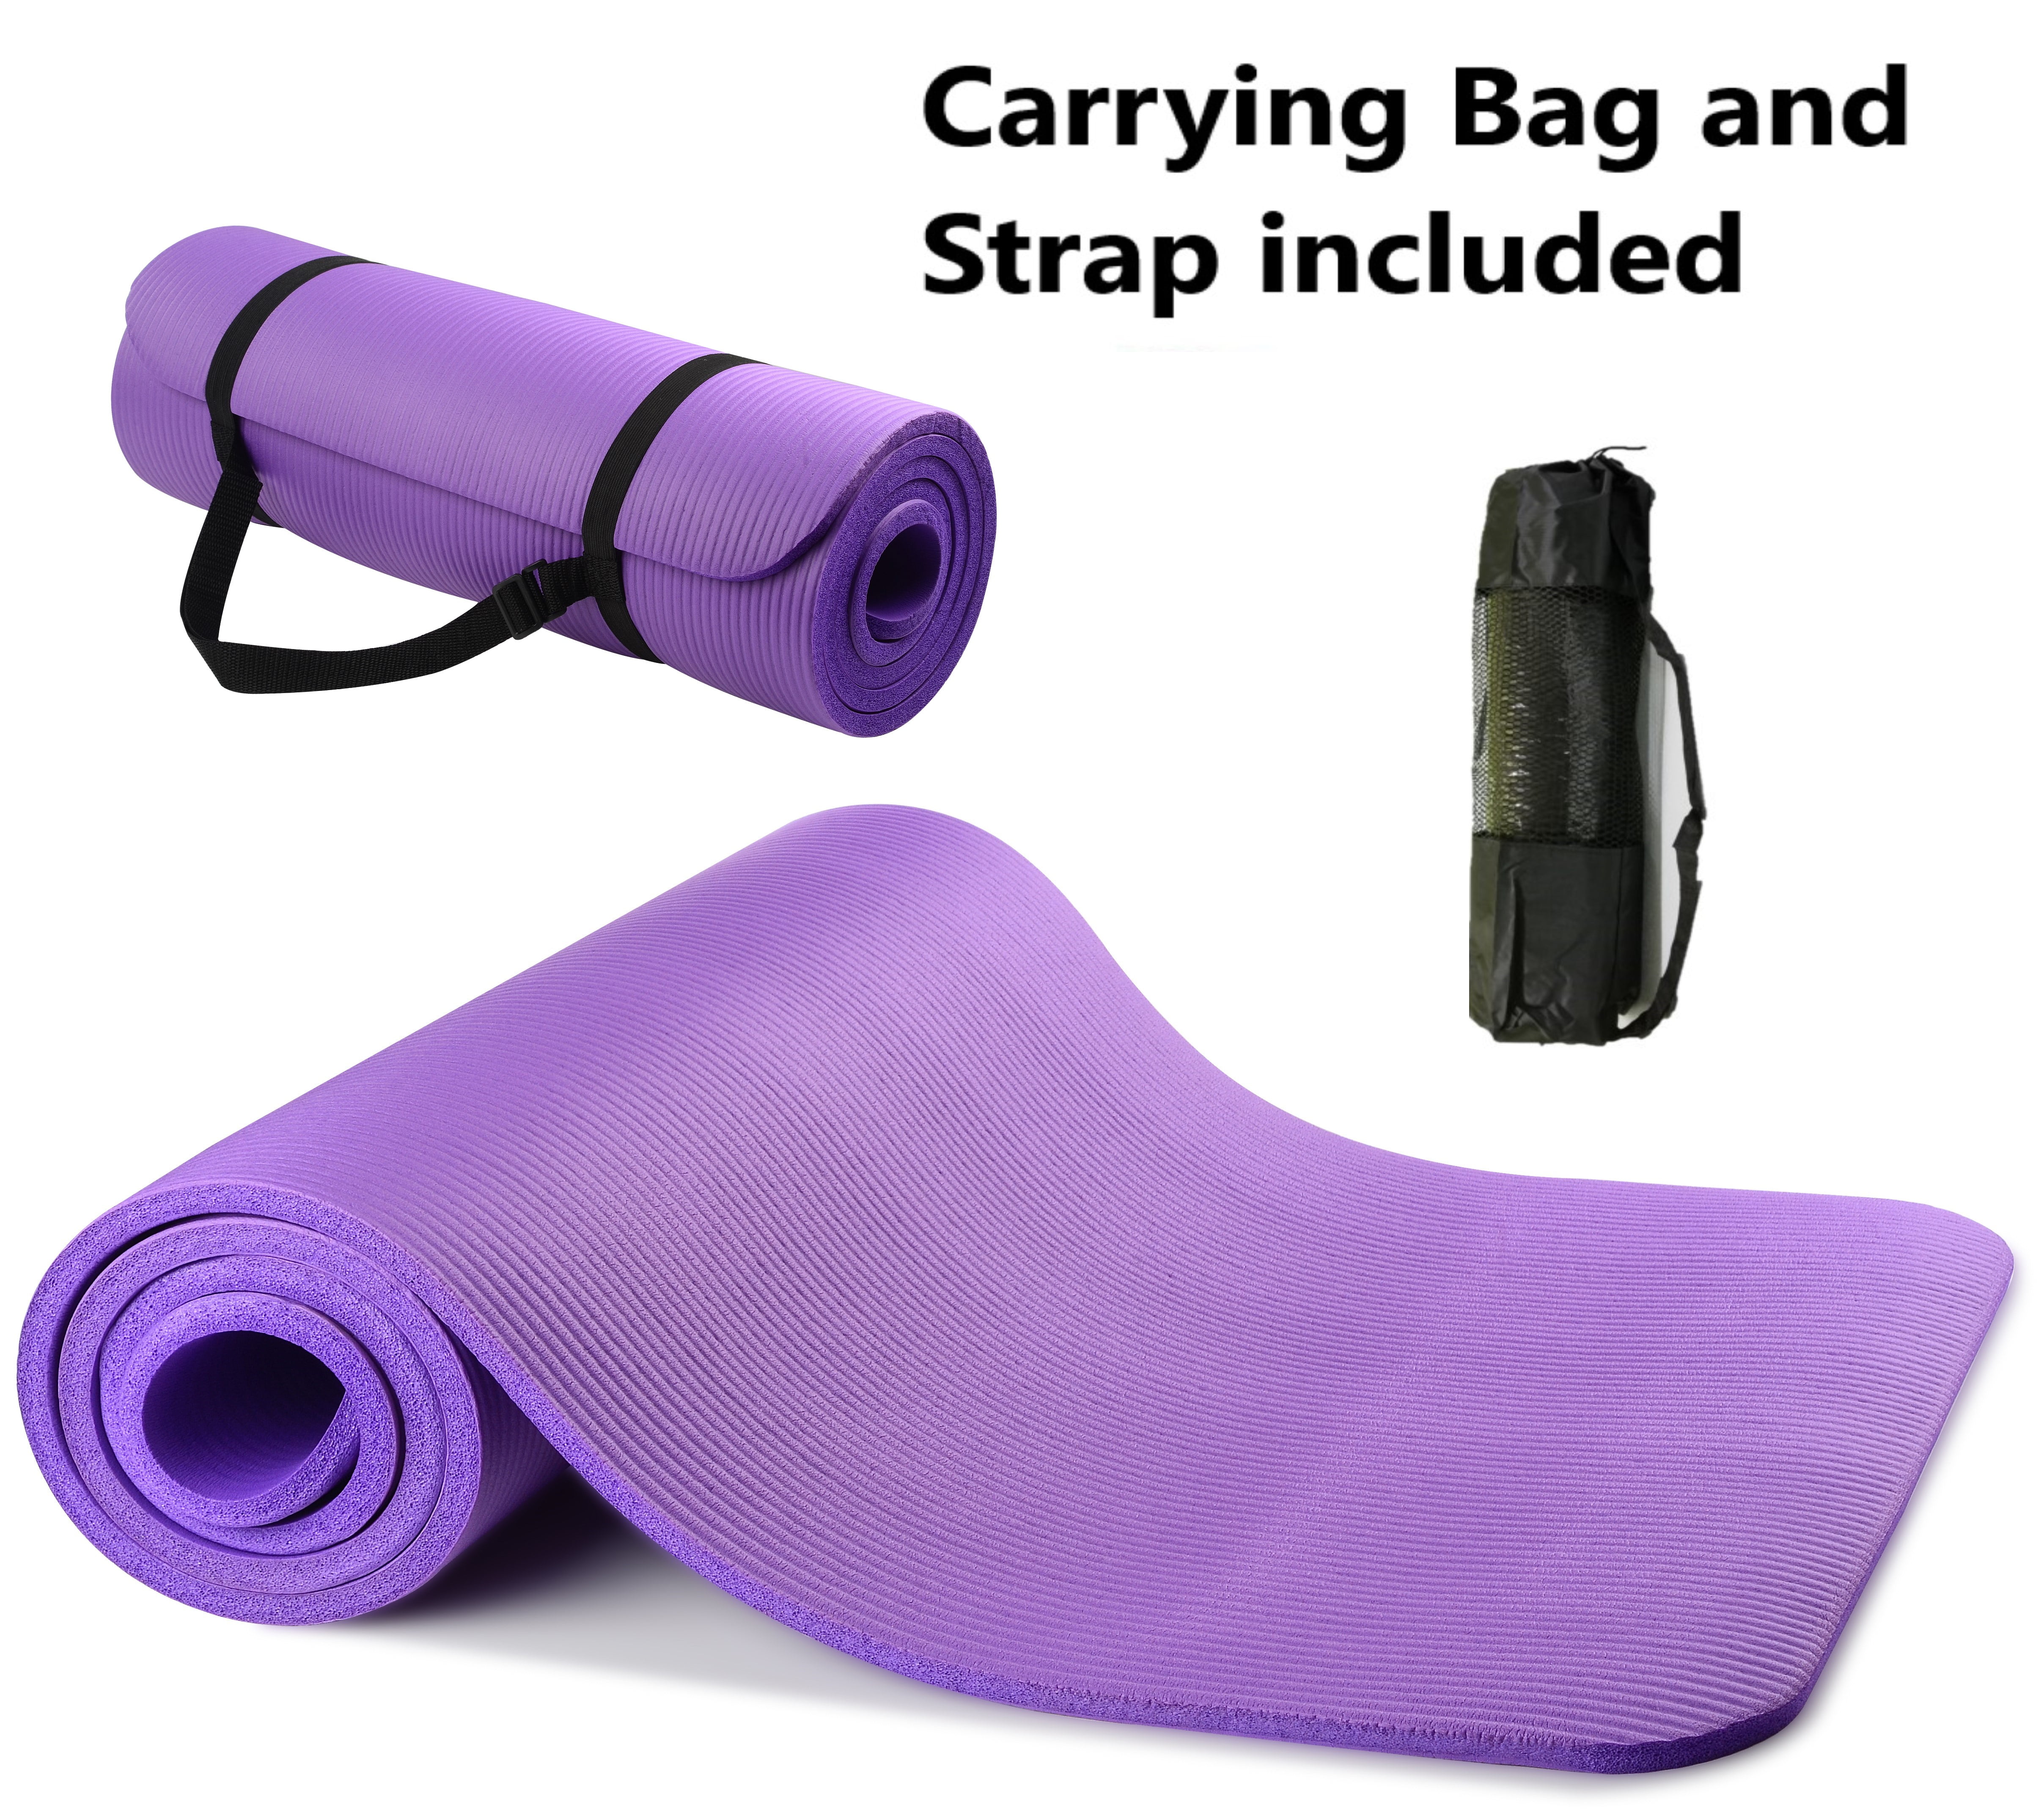 NBR YOGA MAT FOR PILATES GYM EXERCISE WITH CARRY BAG 10MM THICK COMFORTABLE